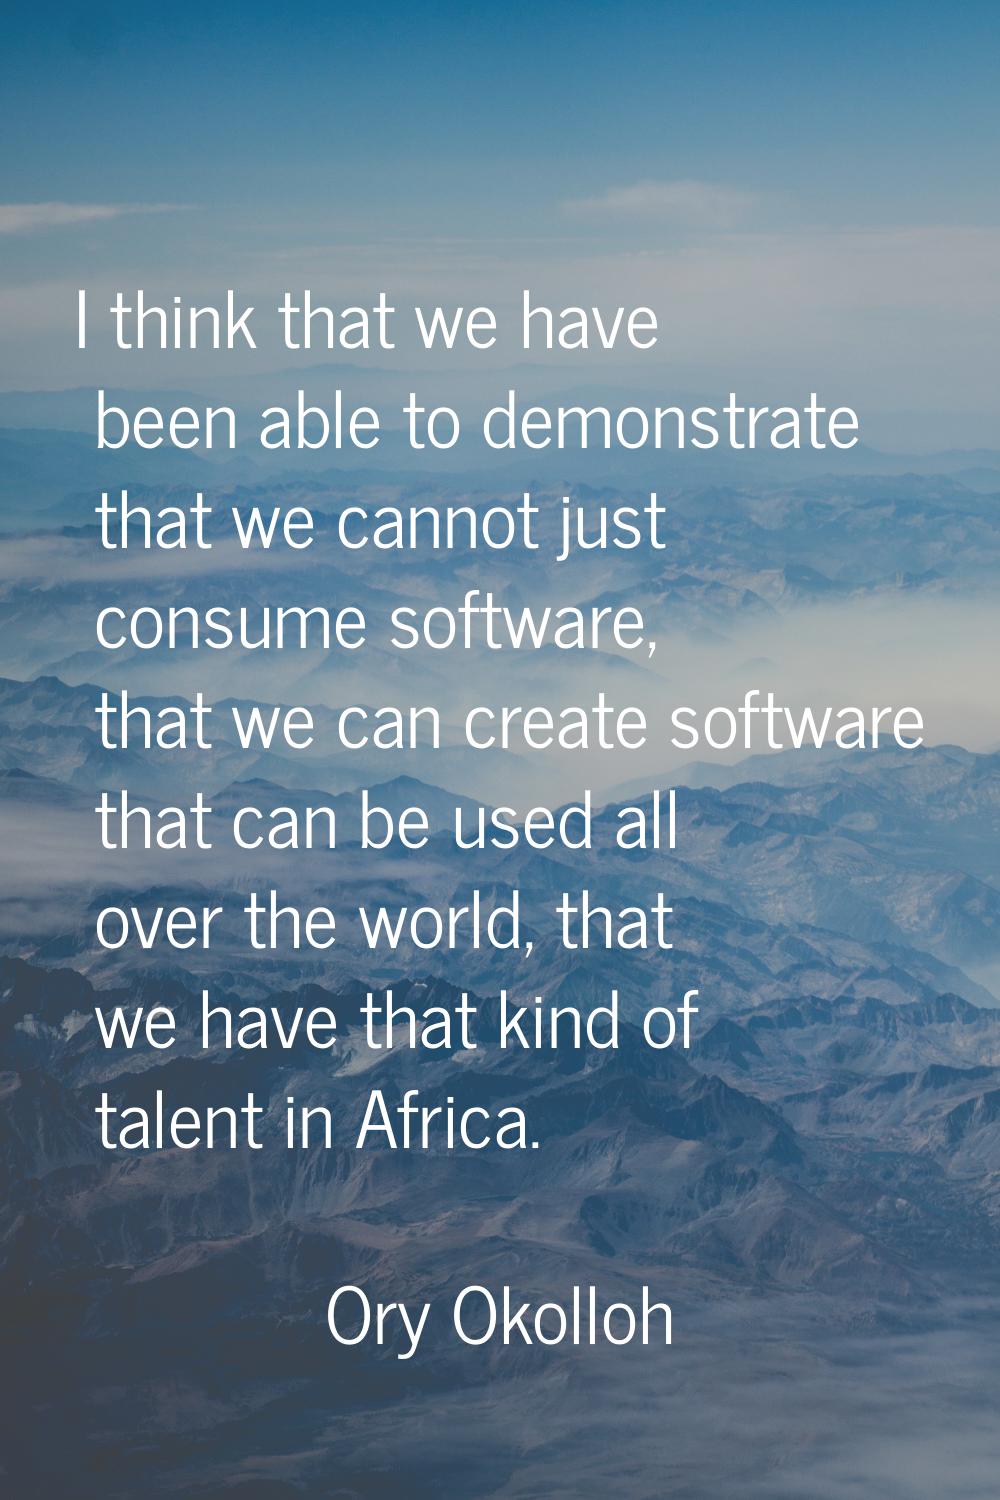 I think that we have been able to demonstrate that we cannot just consume software, that we can cre